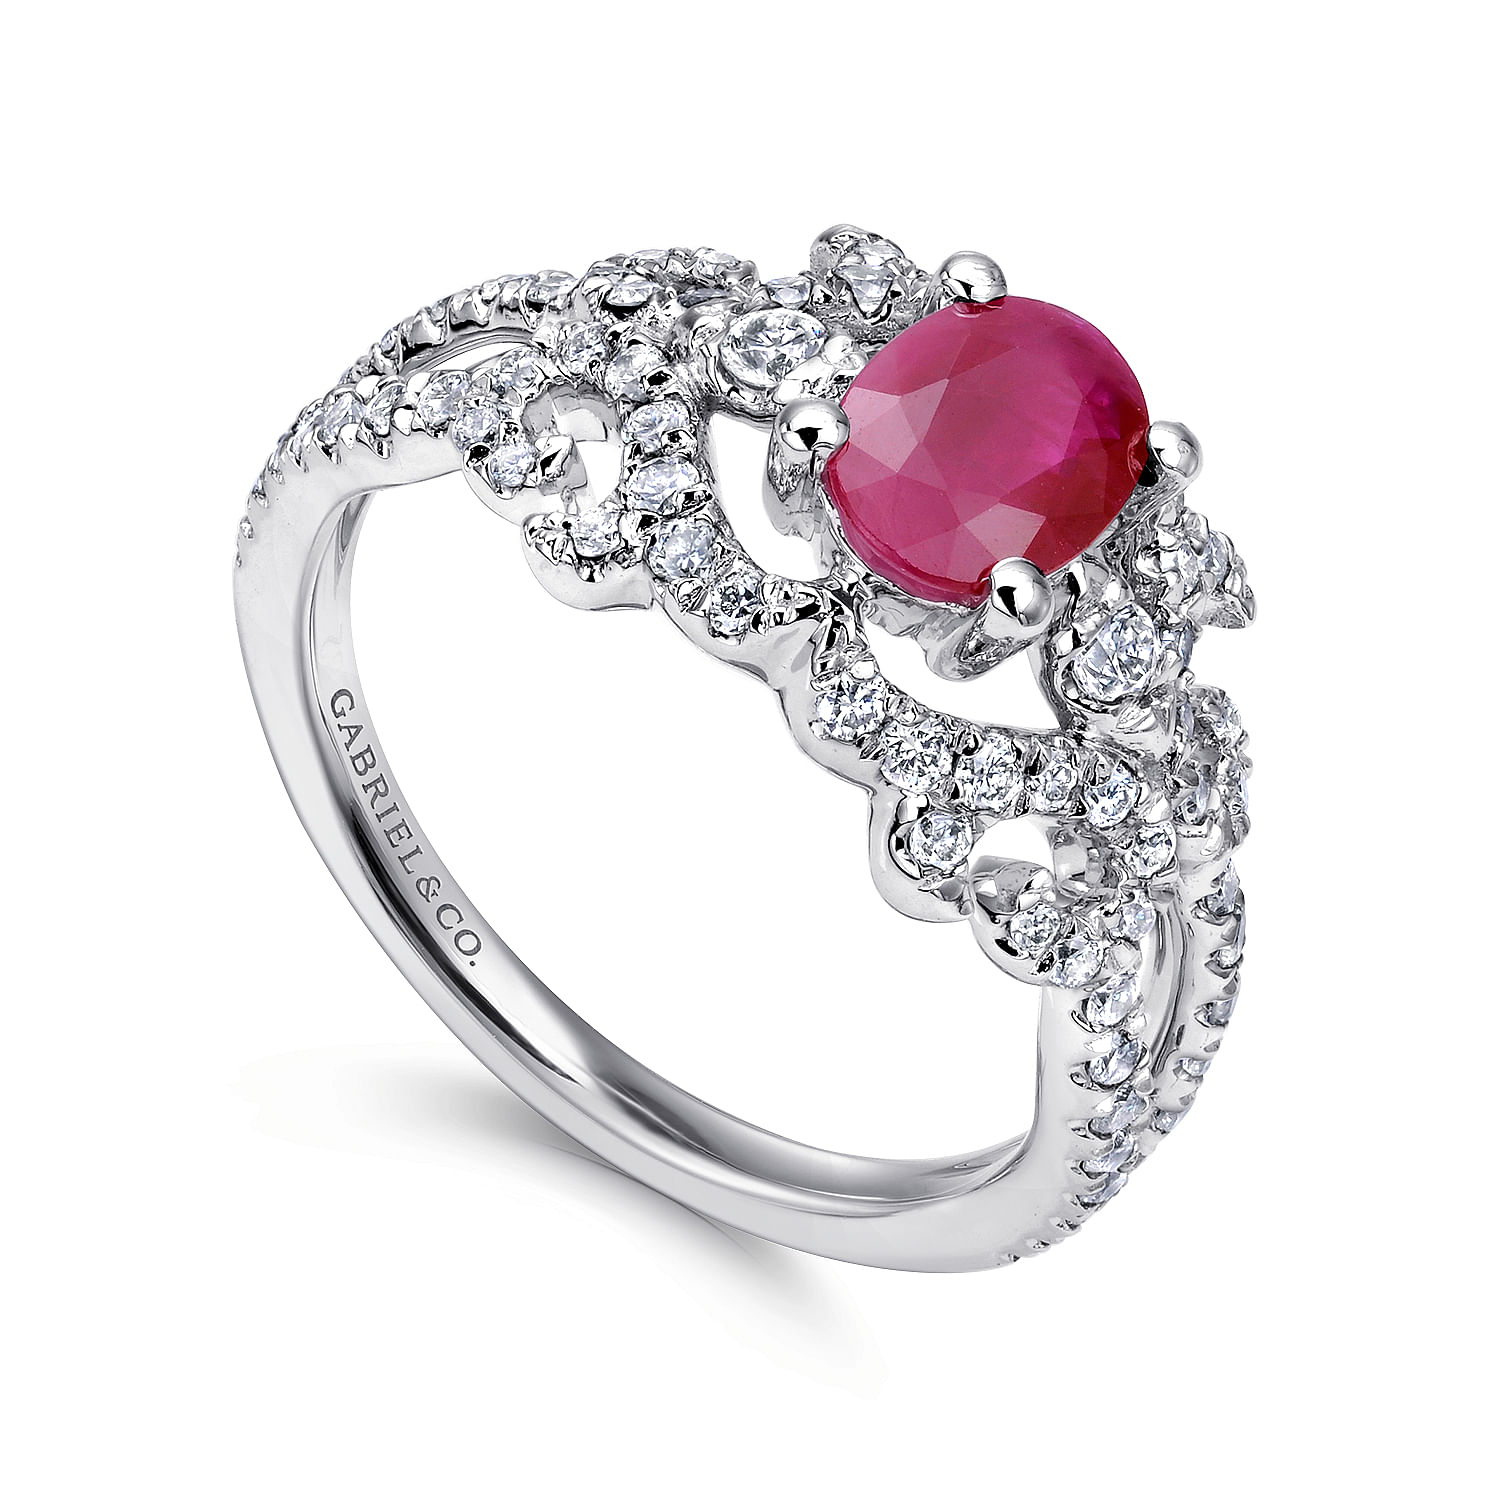 14K White Gold Twisted Diamond Ring with Oval Ruby Center